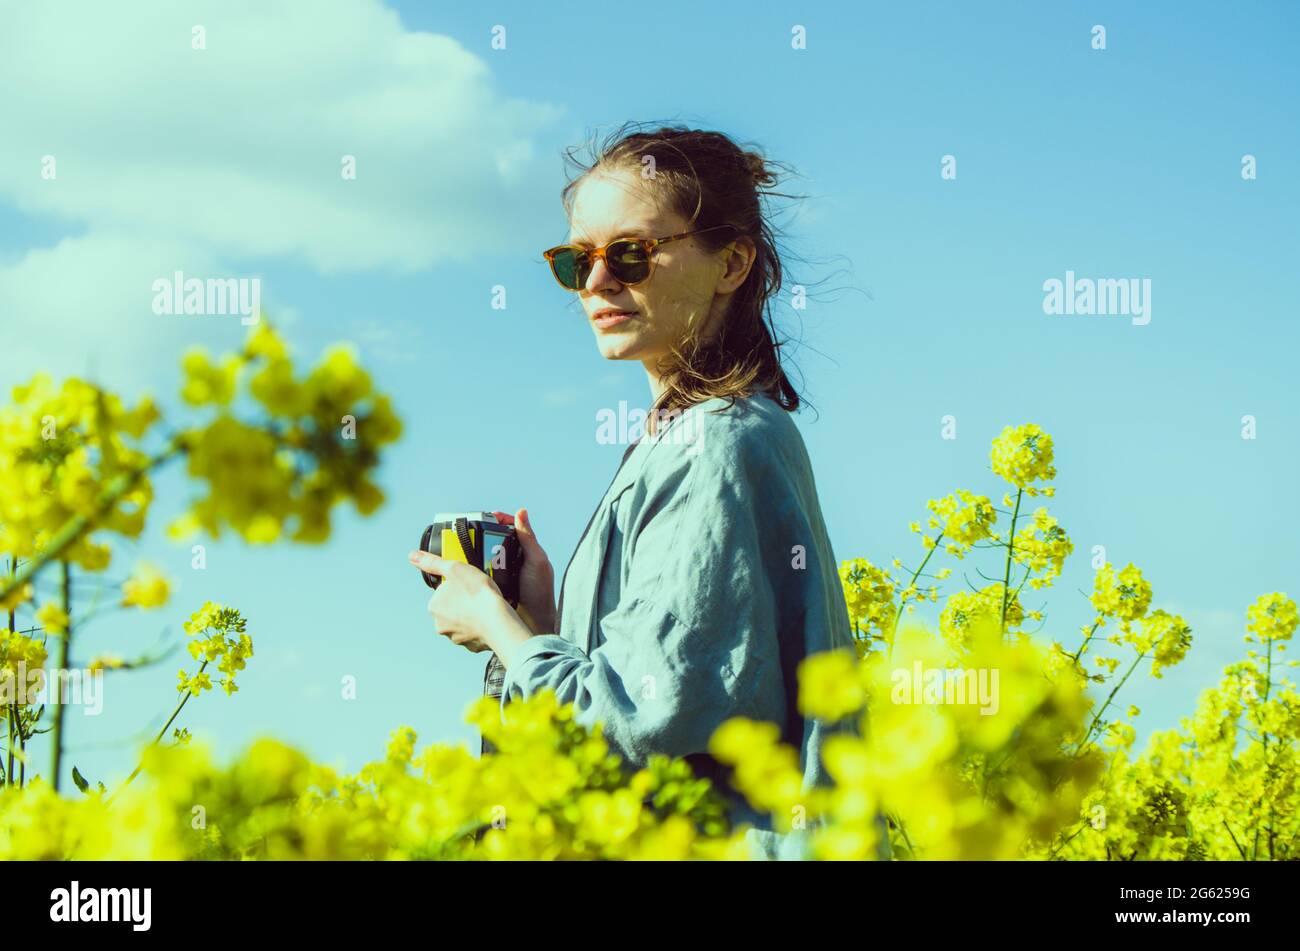 Bright vintage millennial portrait of a woman photographer with warrior hair bun in the middle of a yellow rapeseed field Stock Photo